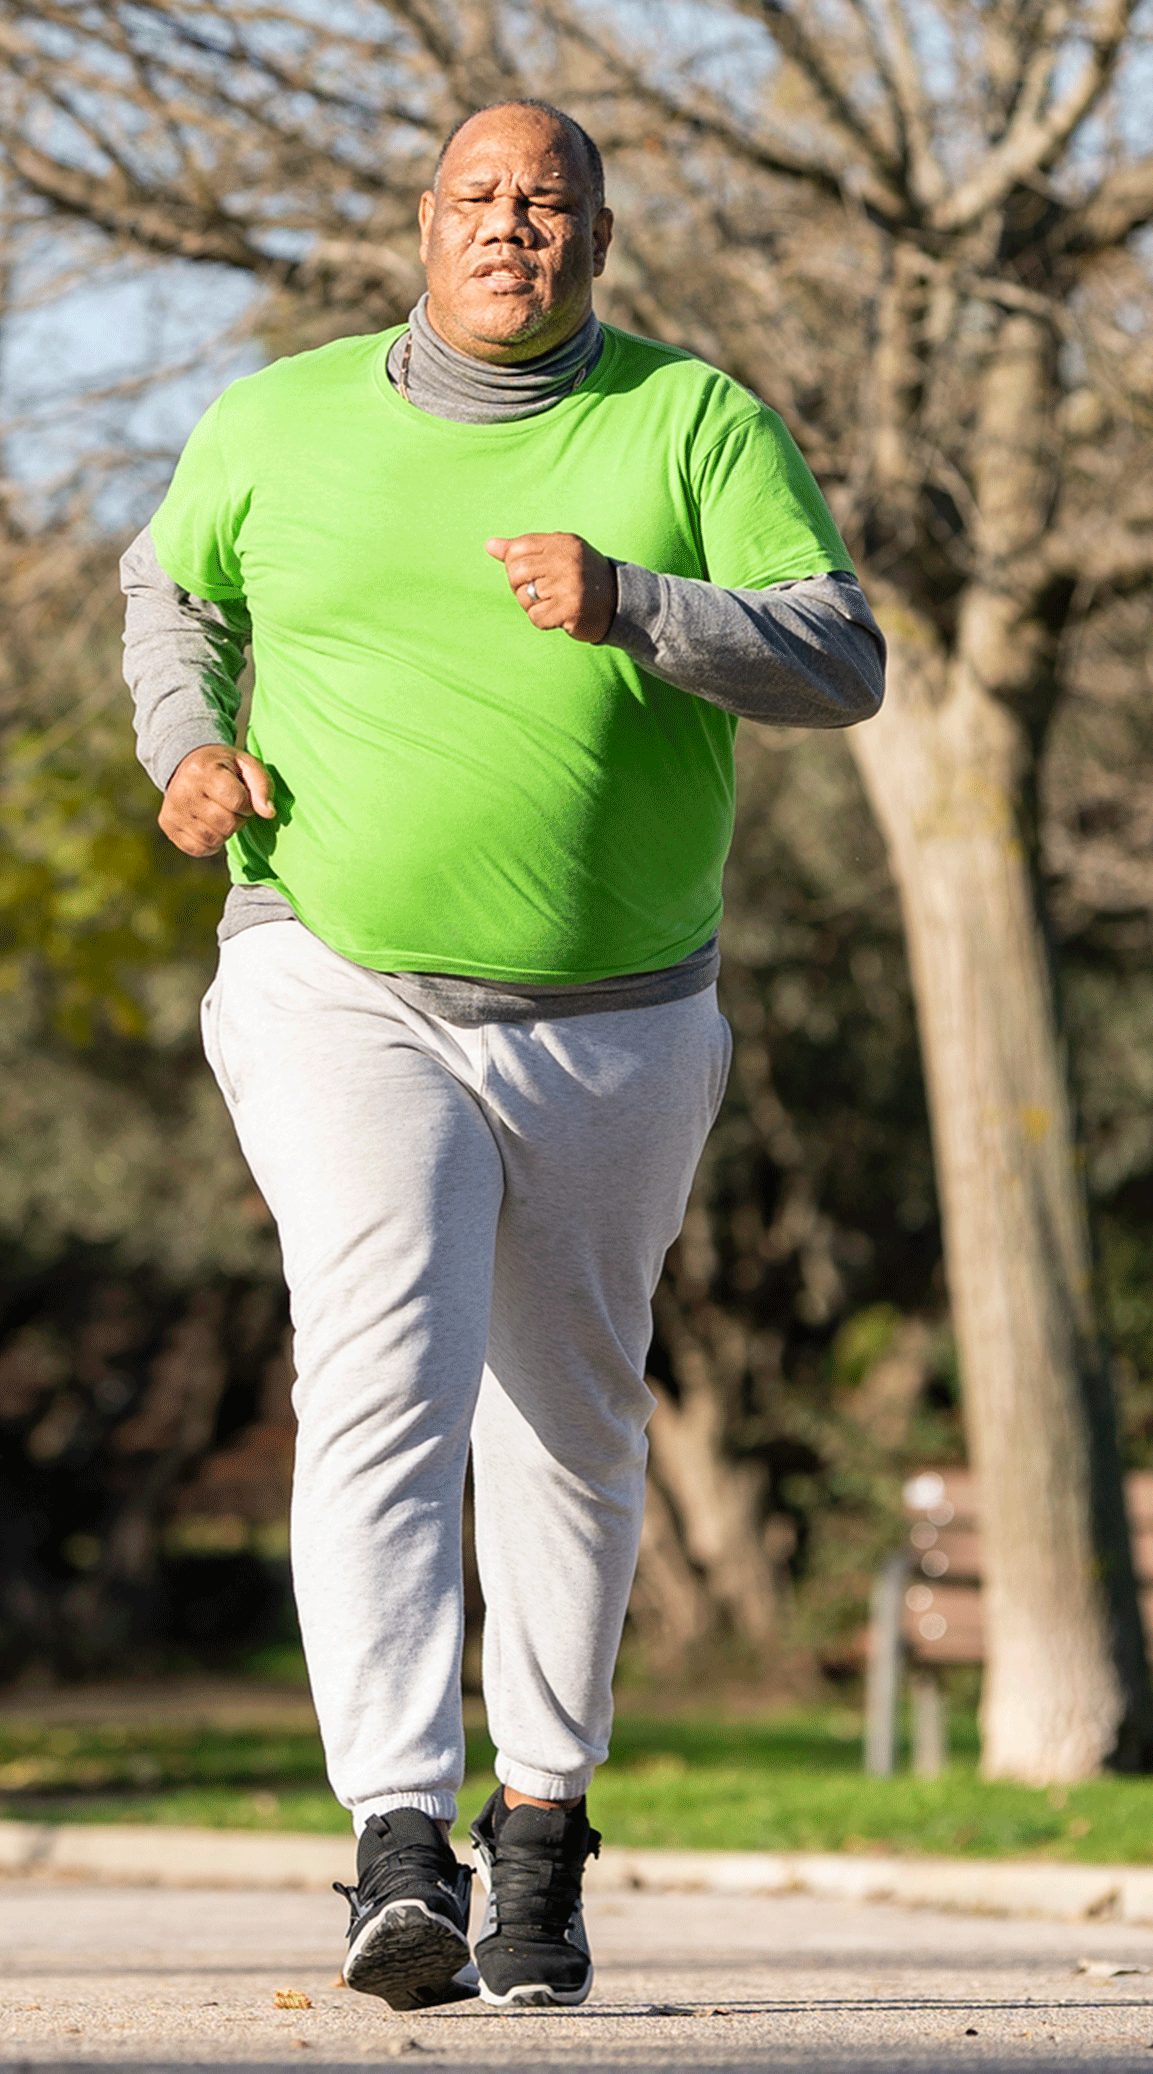 Evening Exercise for Overweight Men